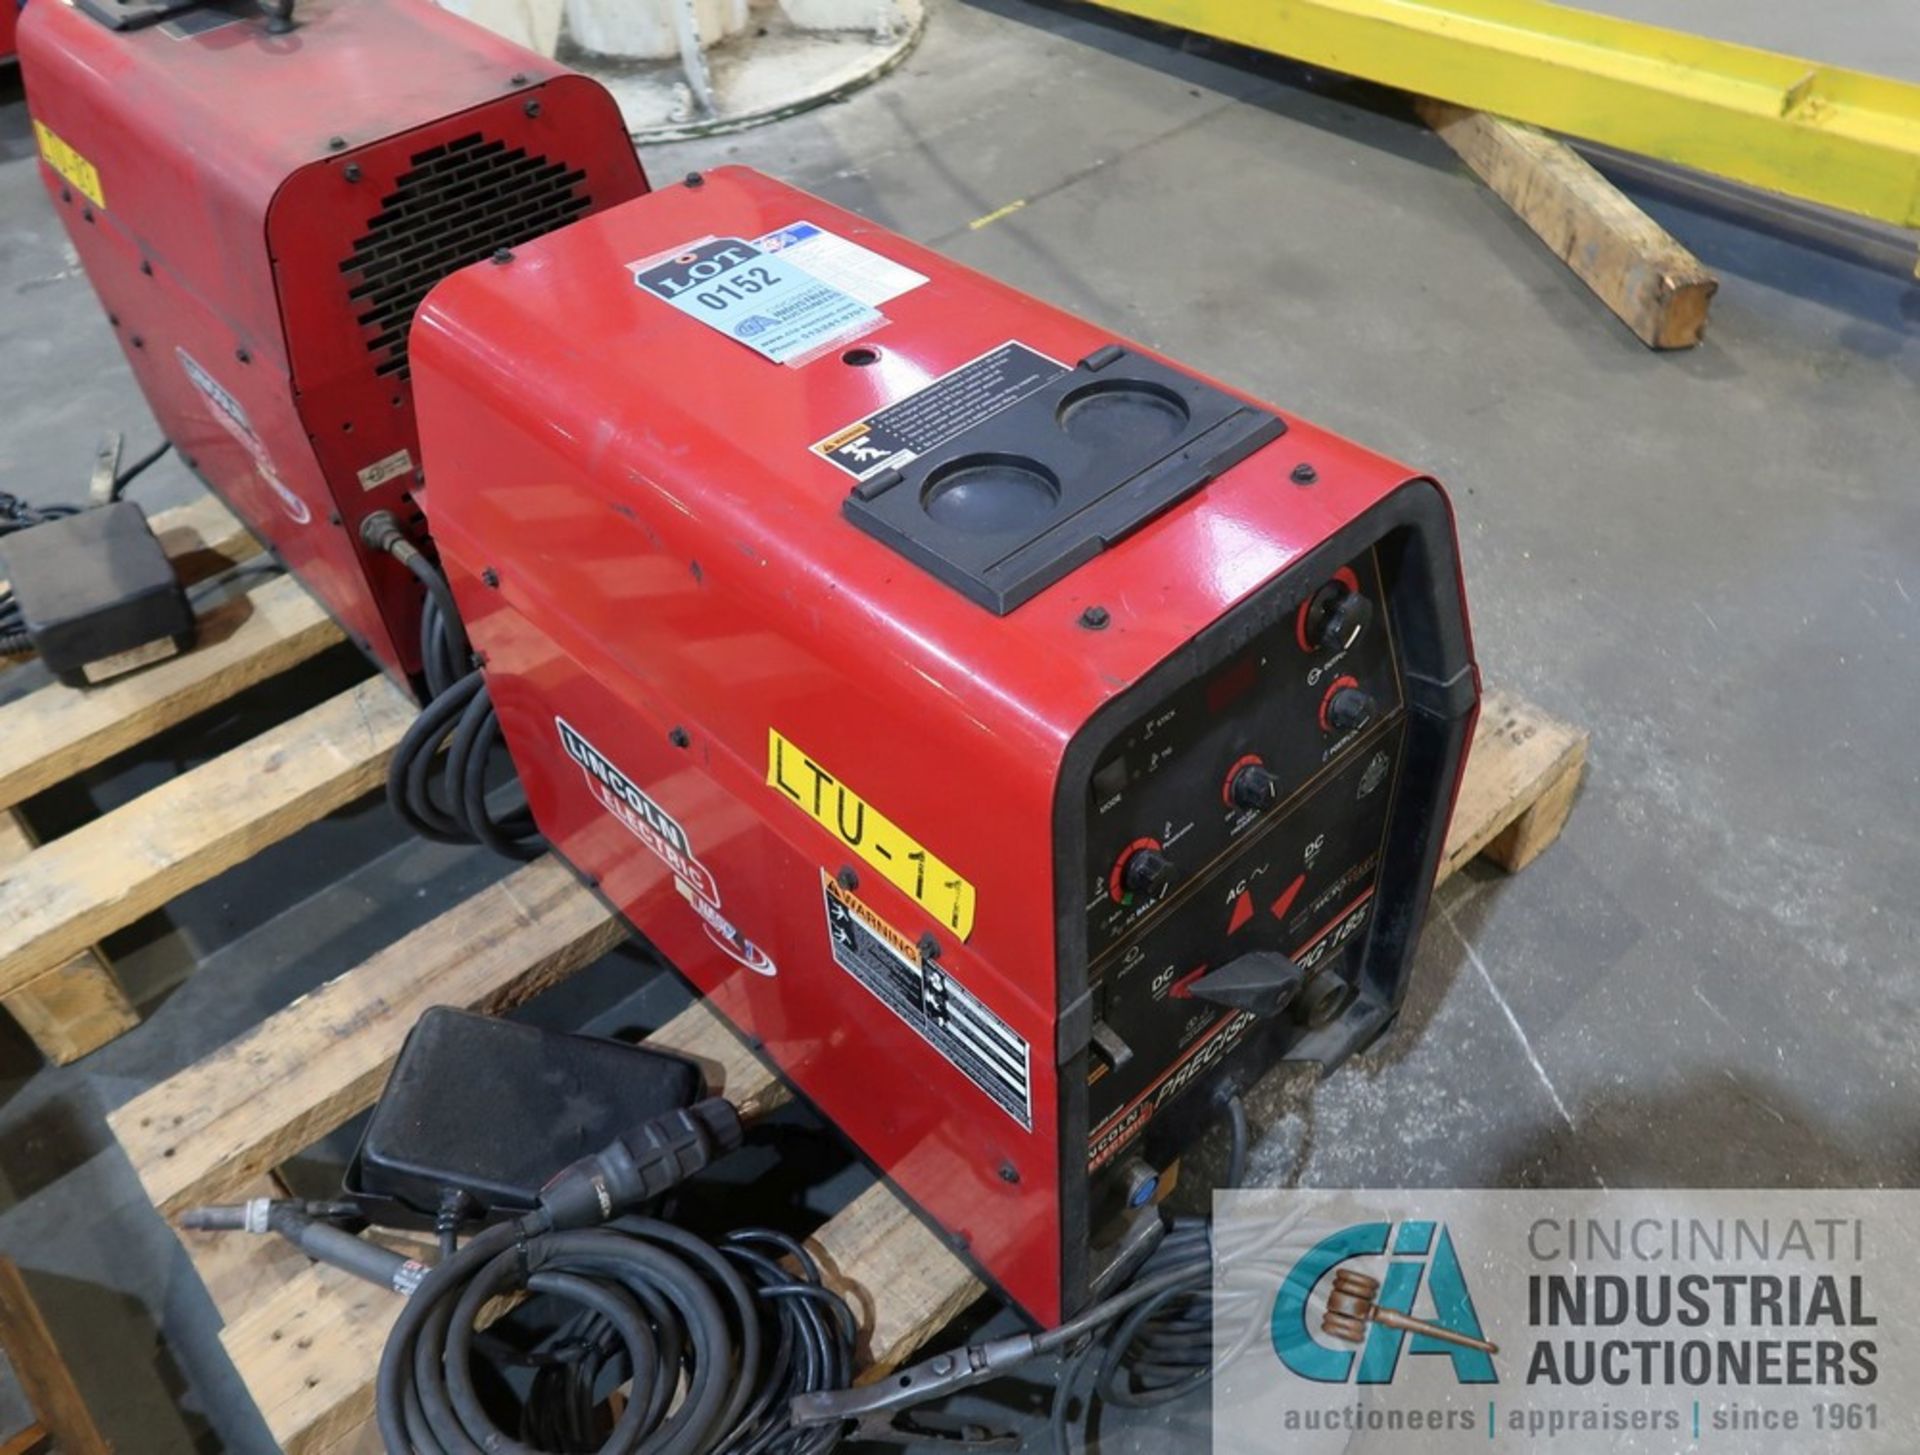 185 AMP LINCOLN ELECTRIC PRECISION TIG 185 WELDING POWER SOURCE; S/N U1050325259 - Image 2 of 3